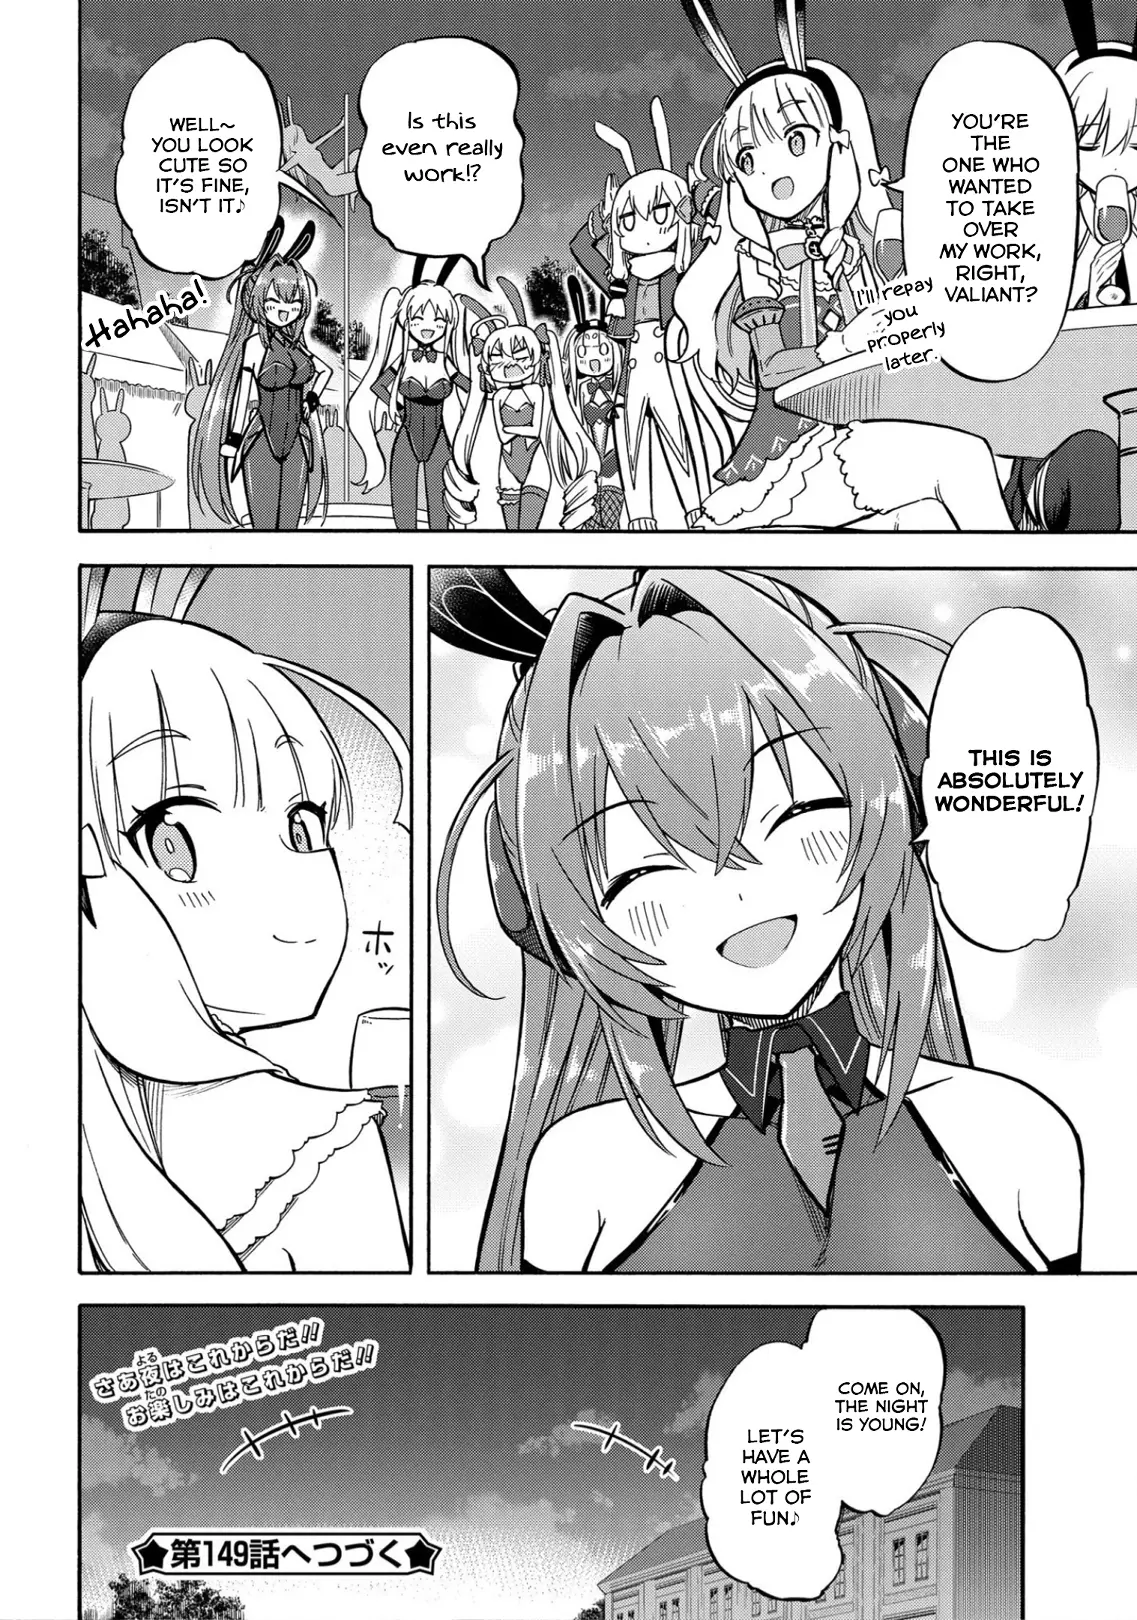 Azur Lane: Queen's Orders - 148 page 4-6f7a8ba0